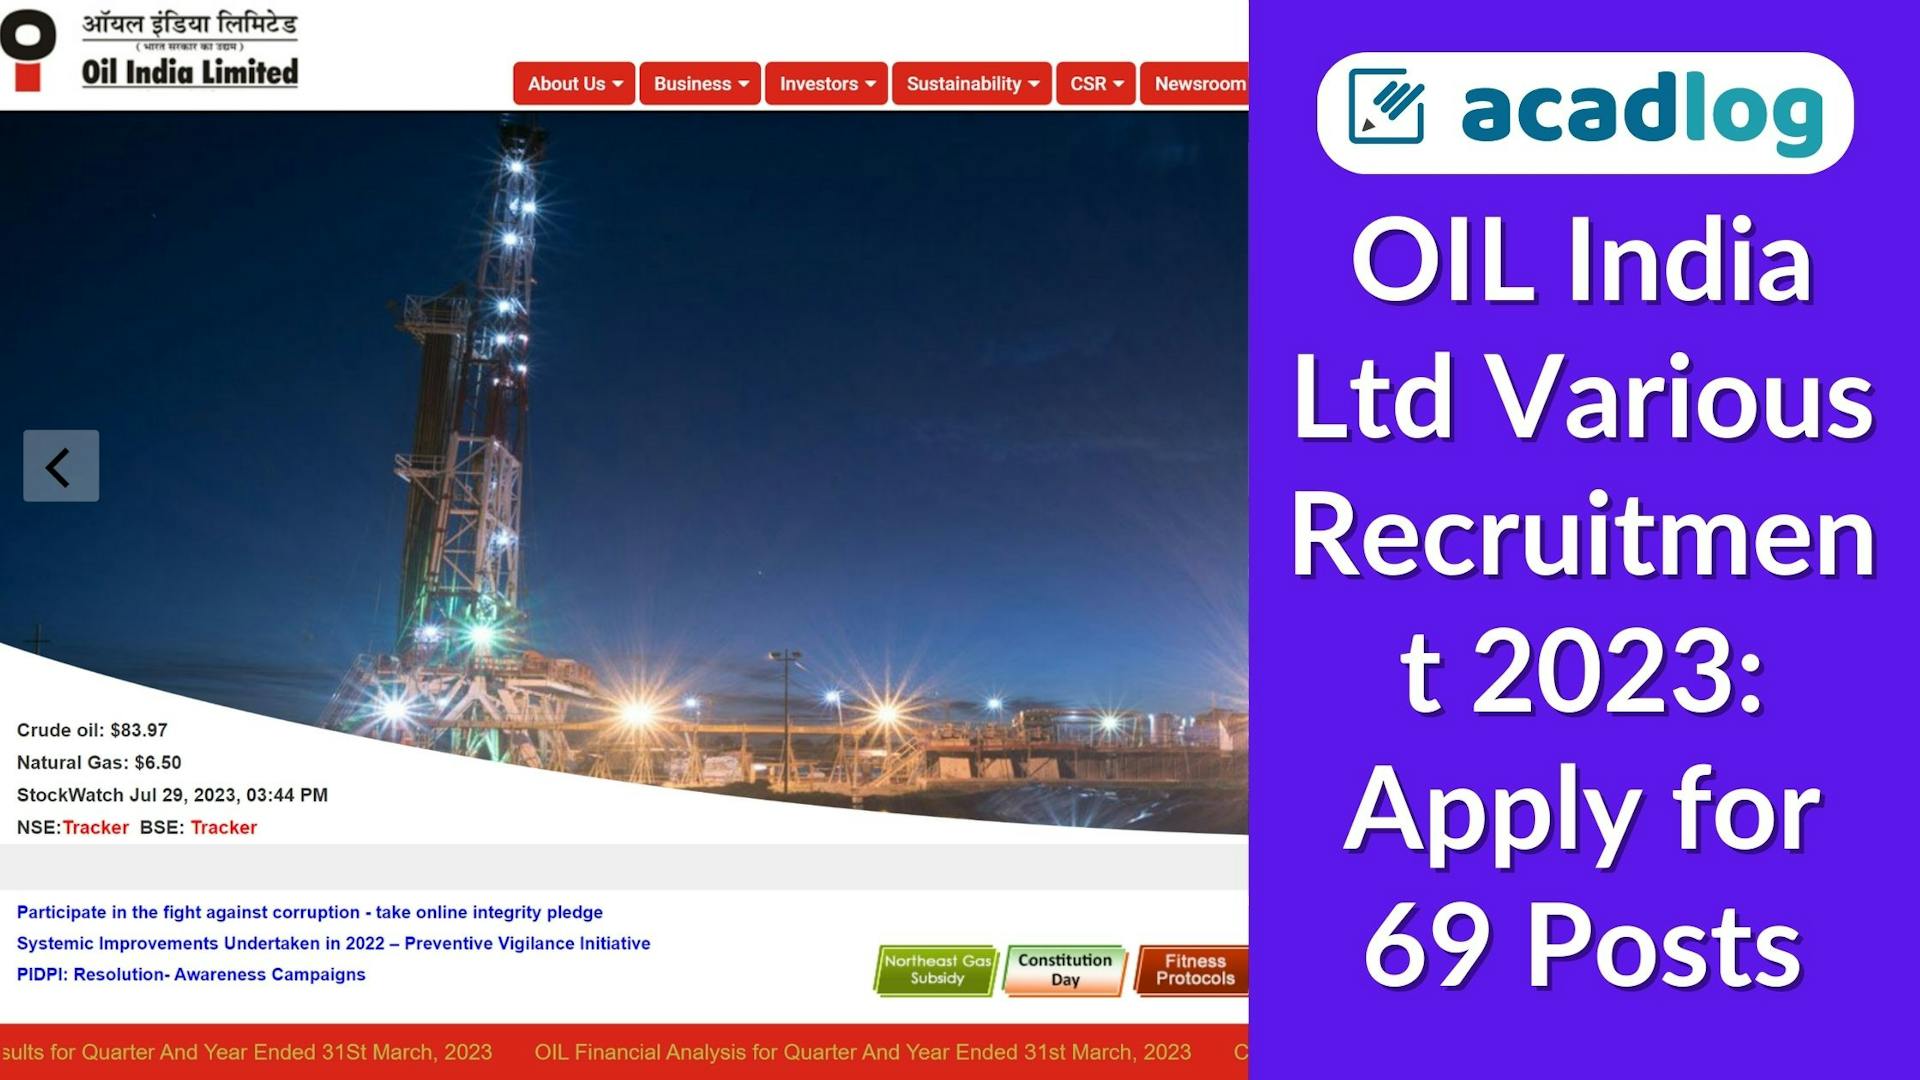 OIL India Ltd Various Recruitment 2023: Apply for 69 Posts 